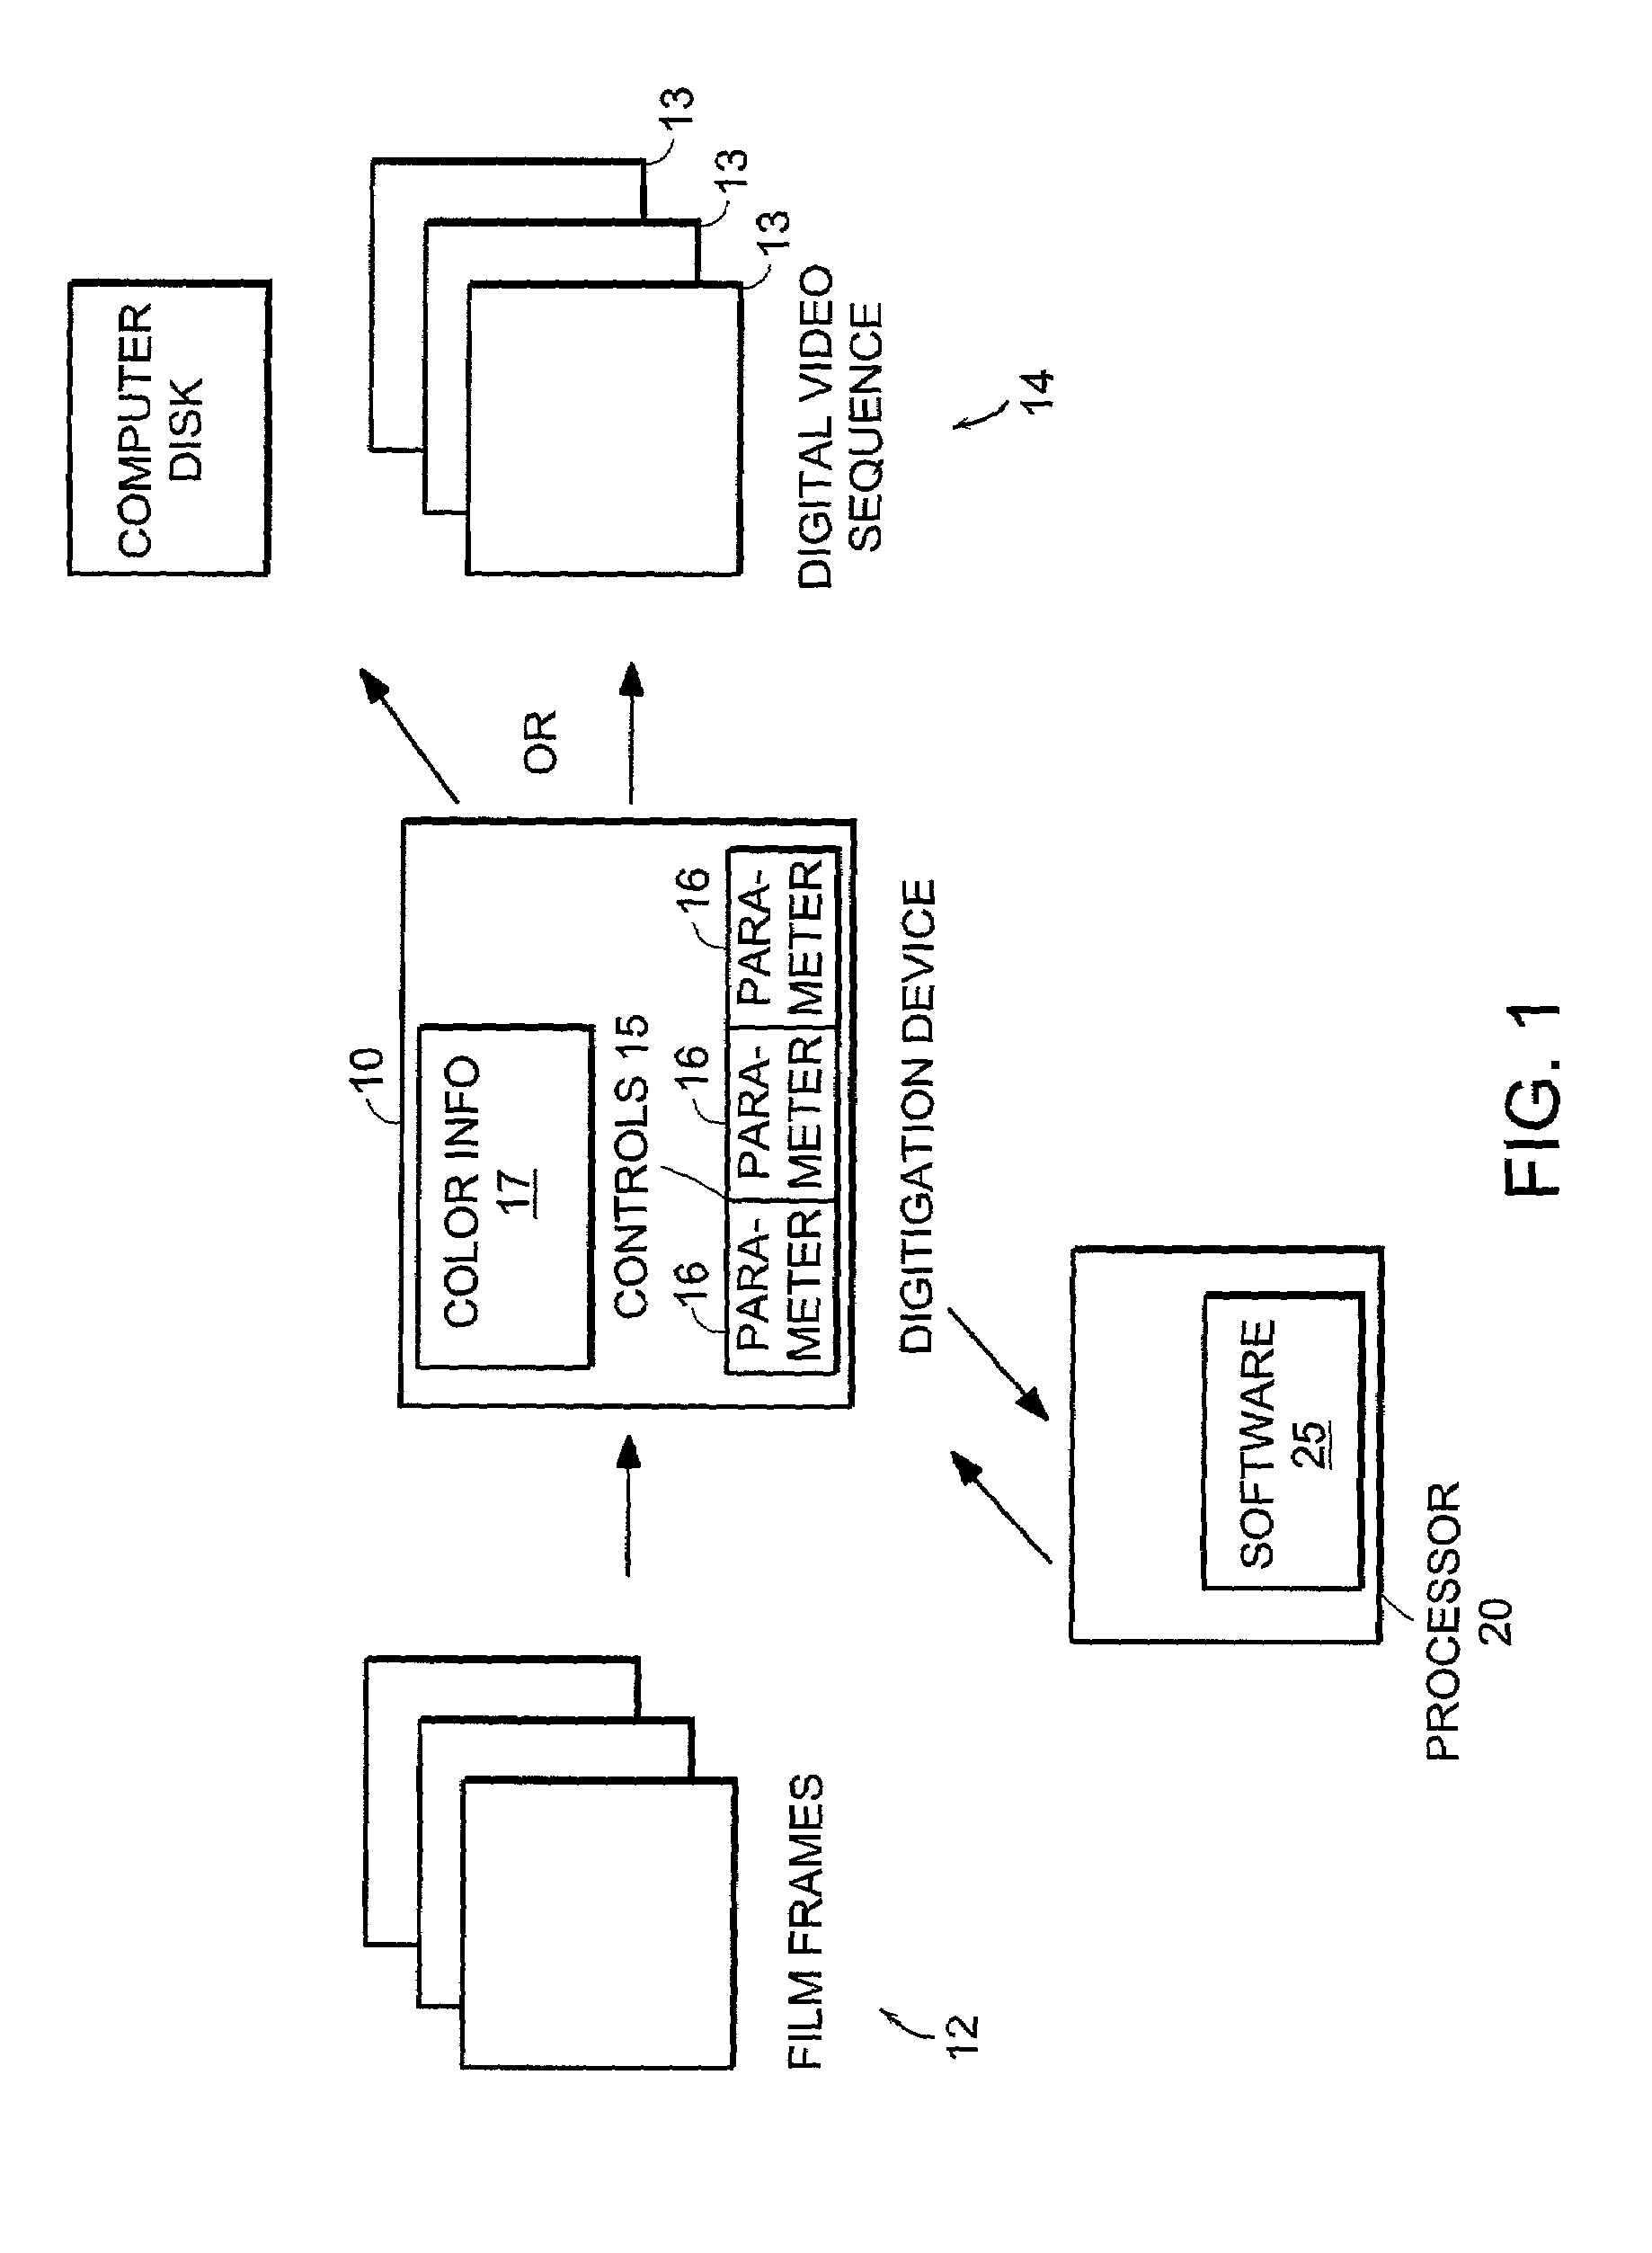 Automated color control in film-to-digital transfer